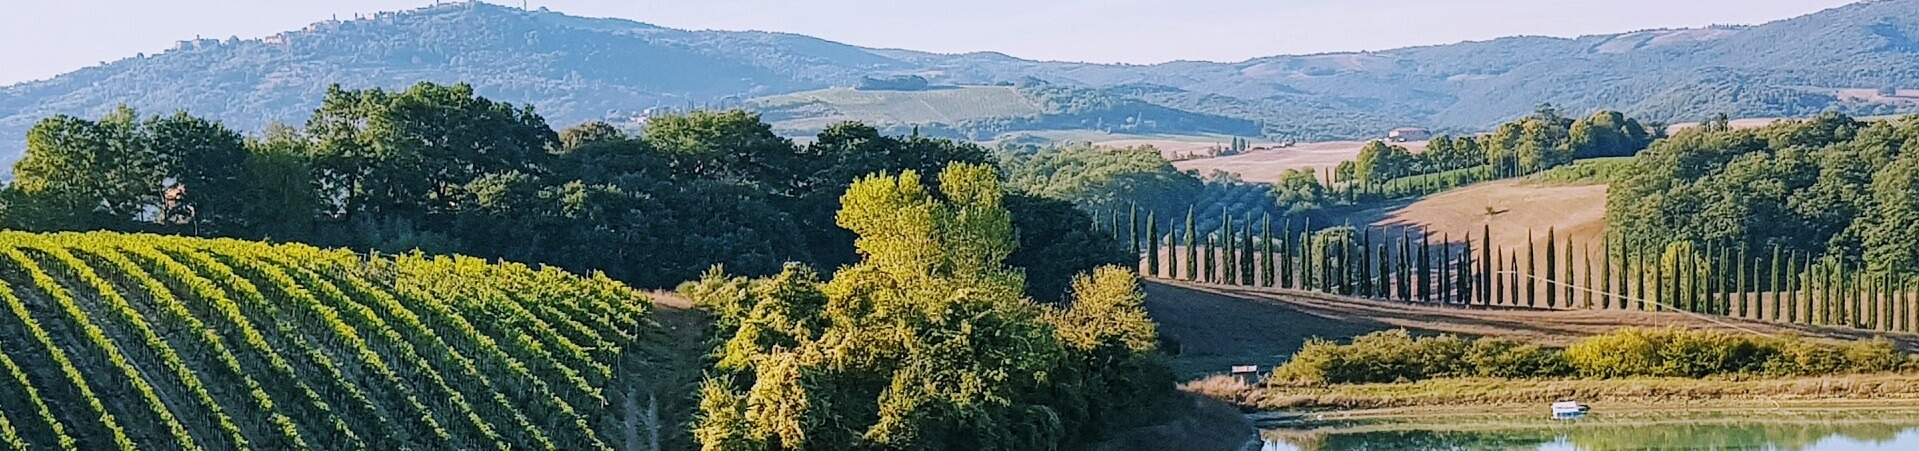 How do you get to wineries in Tuscany?